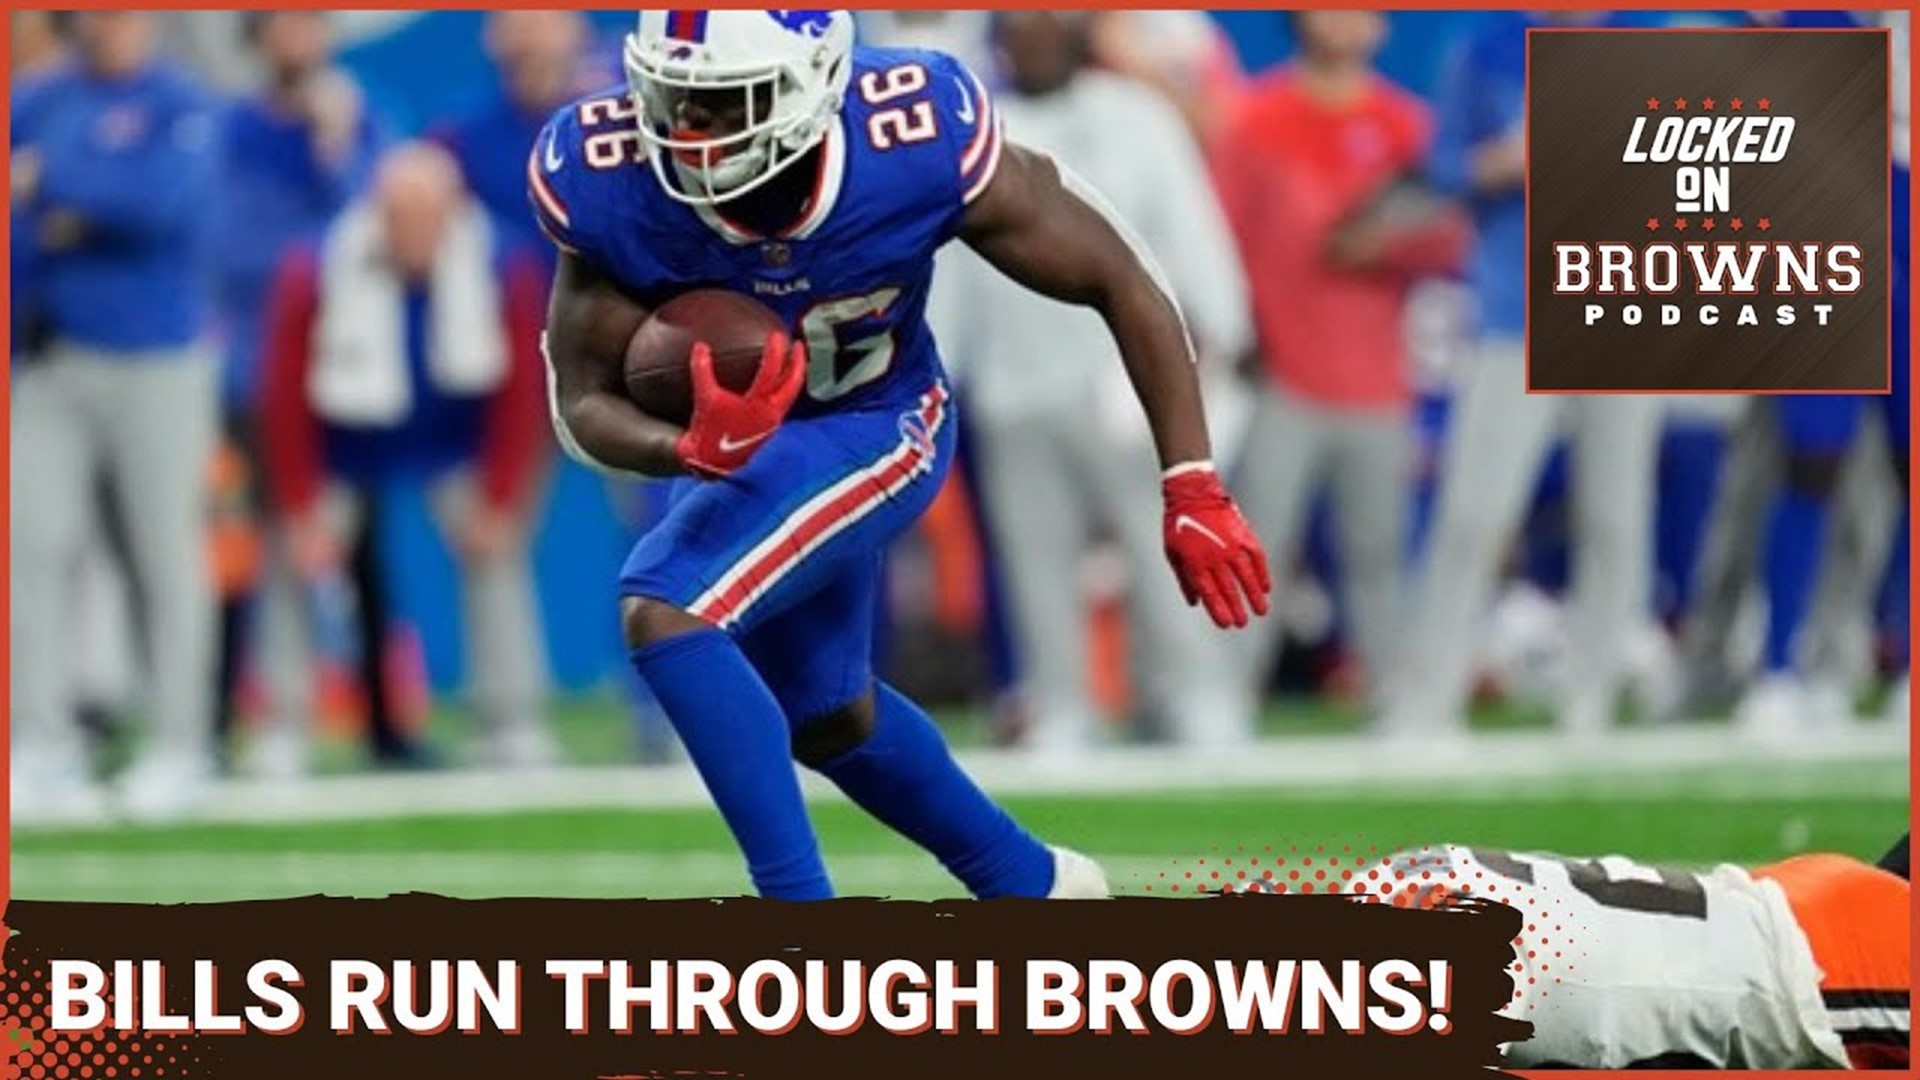 The Cleveland Browns started off strong, but eventually cooled off and lost the game to the Buffalo Bills 31-23. Here’s our analysis of the game.